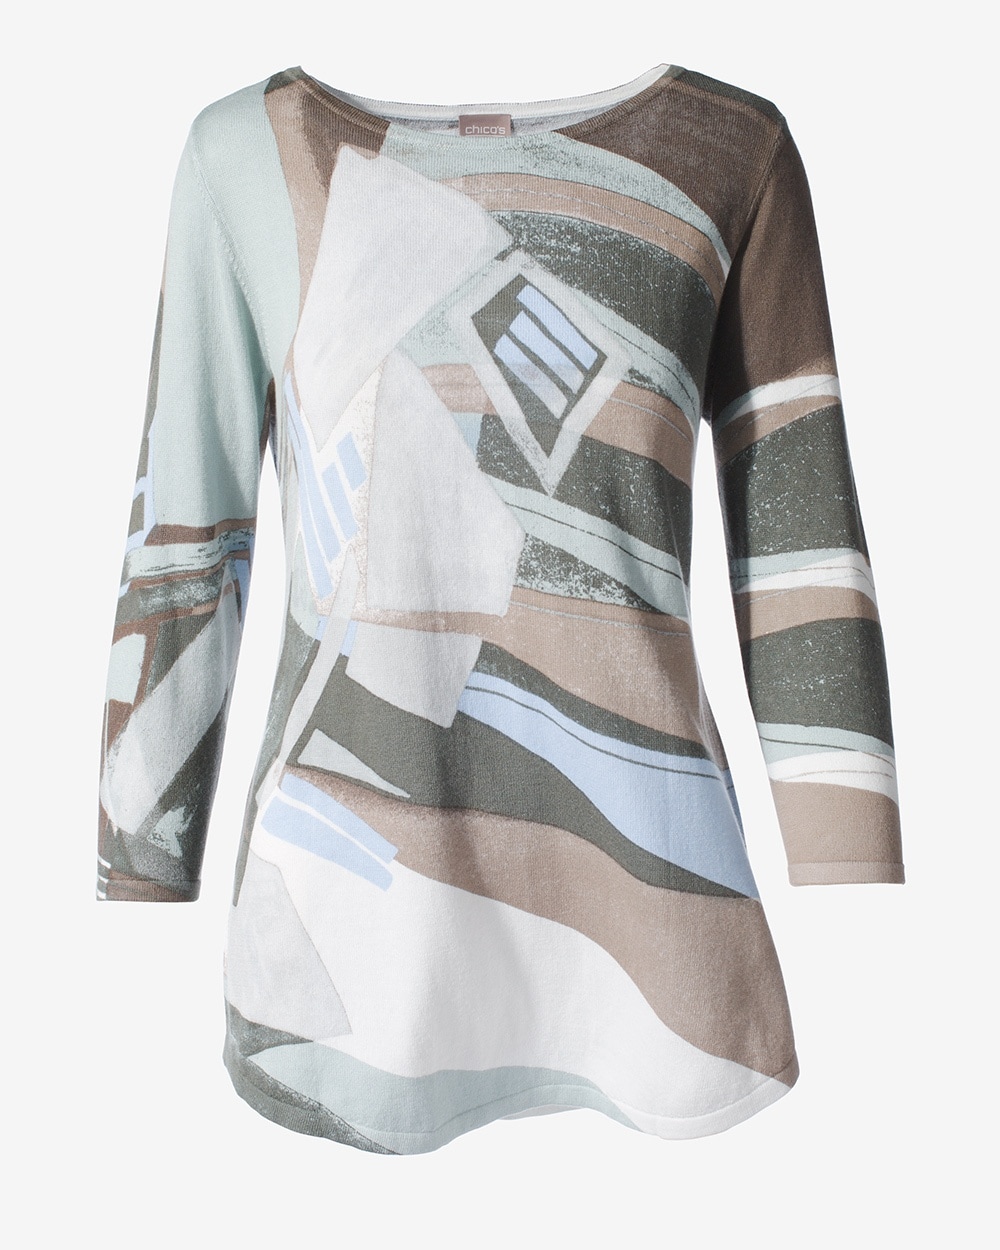 Easywear Abstract Cityscape Top